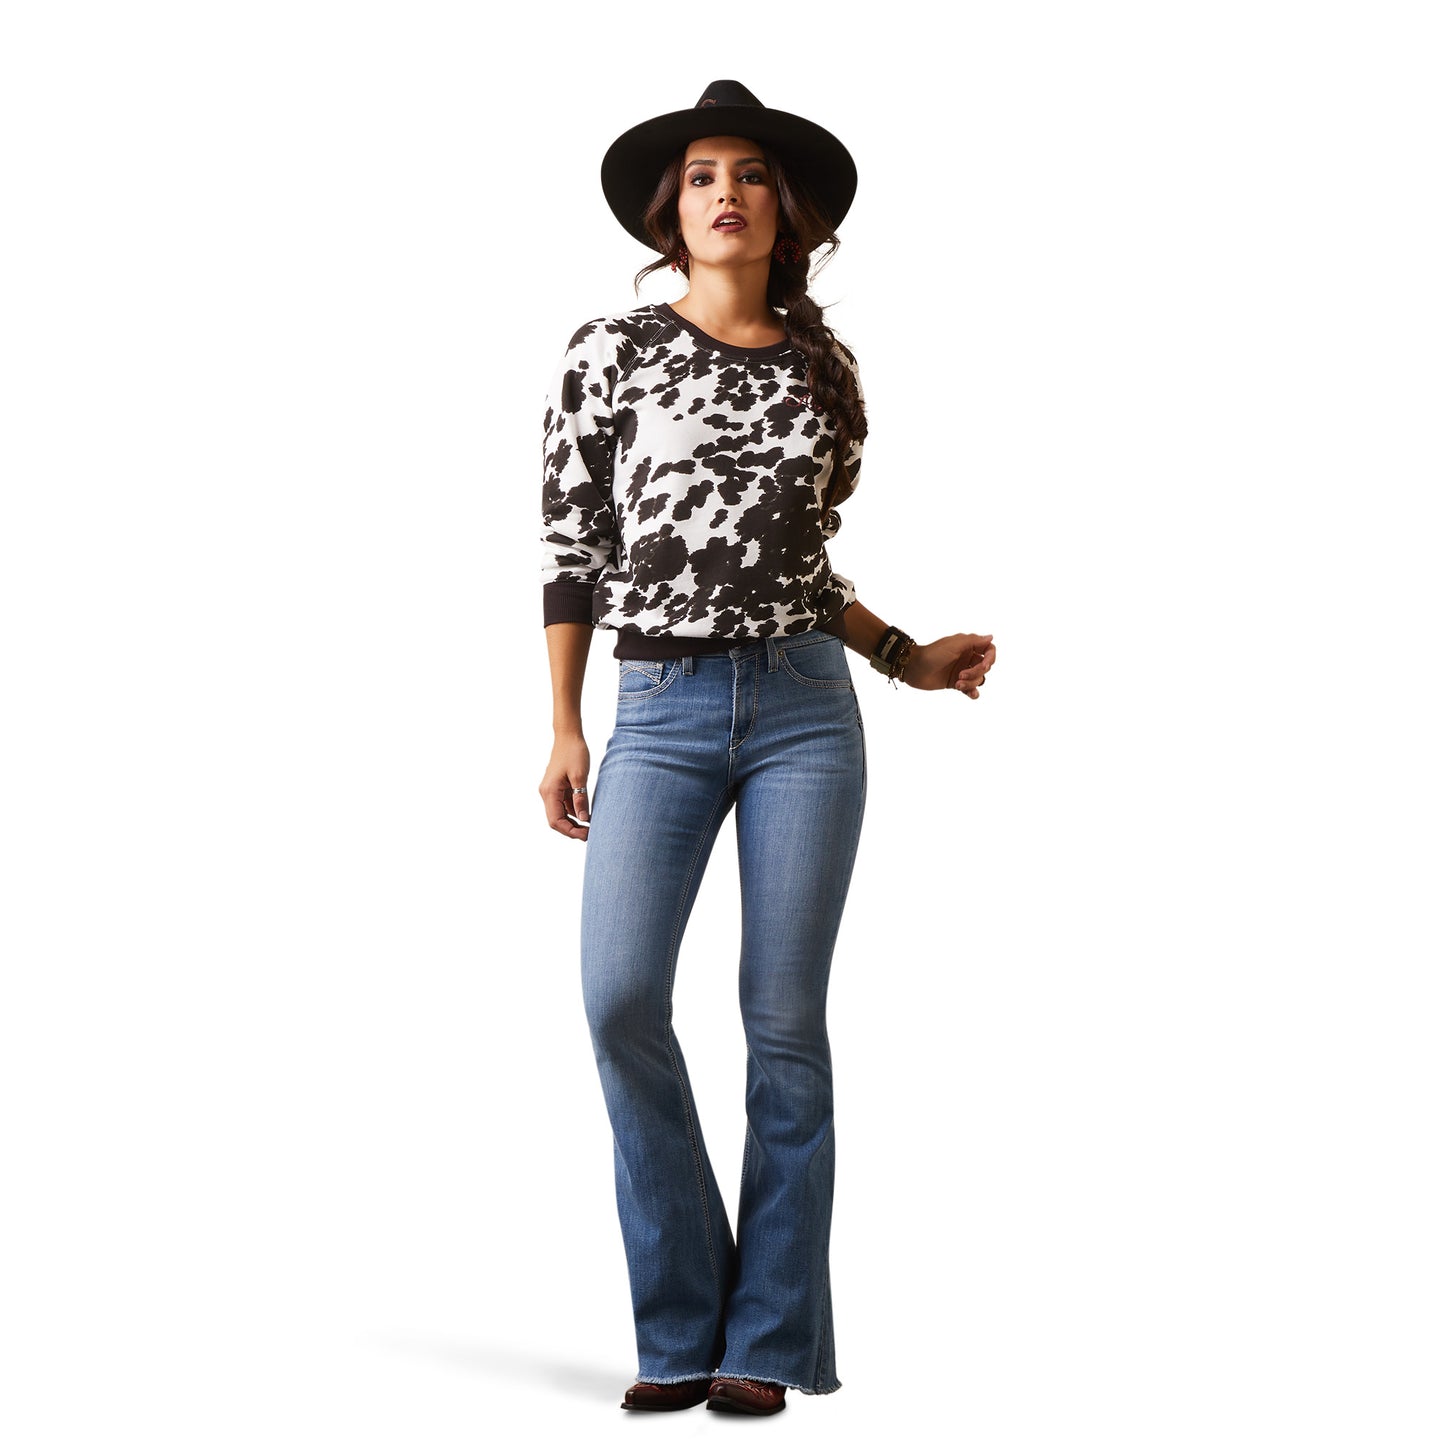 Load image into Gallery viewer, Ariat® Ladies R.E.A.L Holstein Cow Print Crew Sweatshirt 10043681
